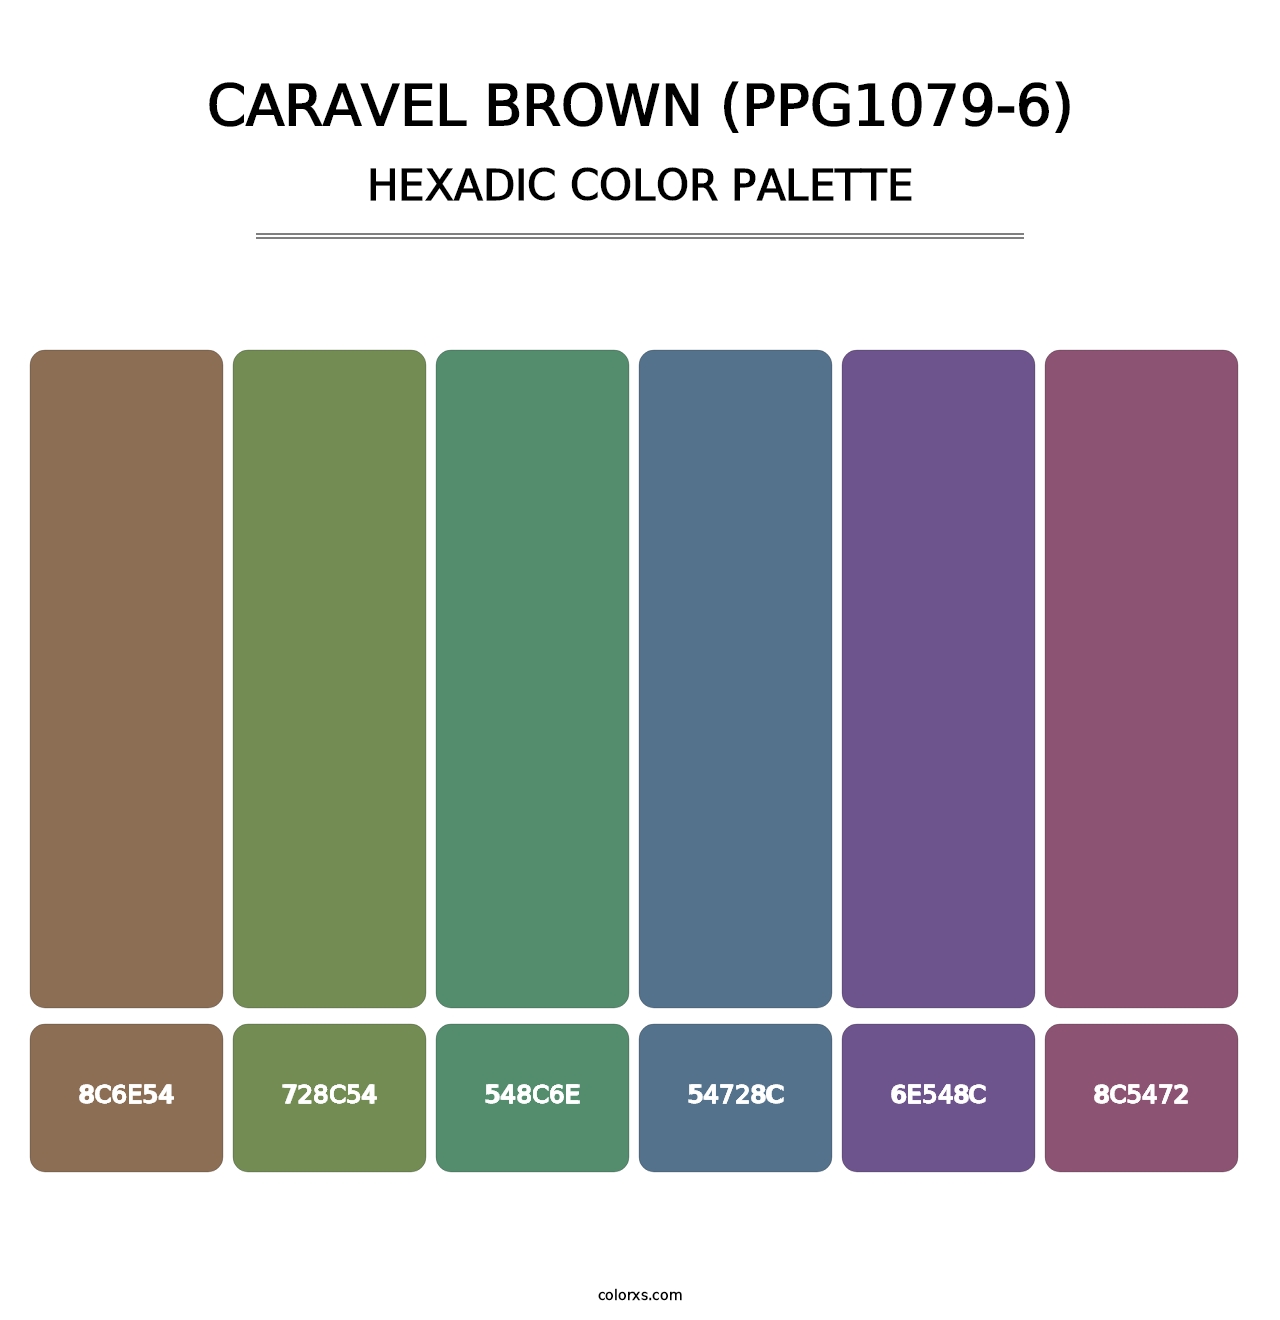 Caravel Brown (PPG1079-6) - Hexadic Color Palette